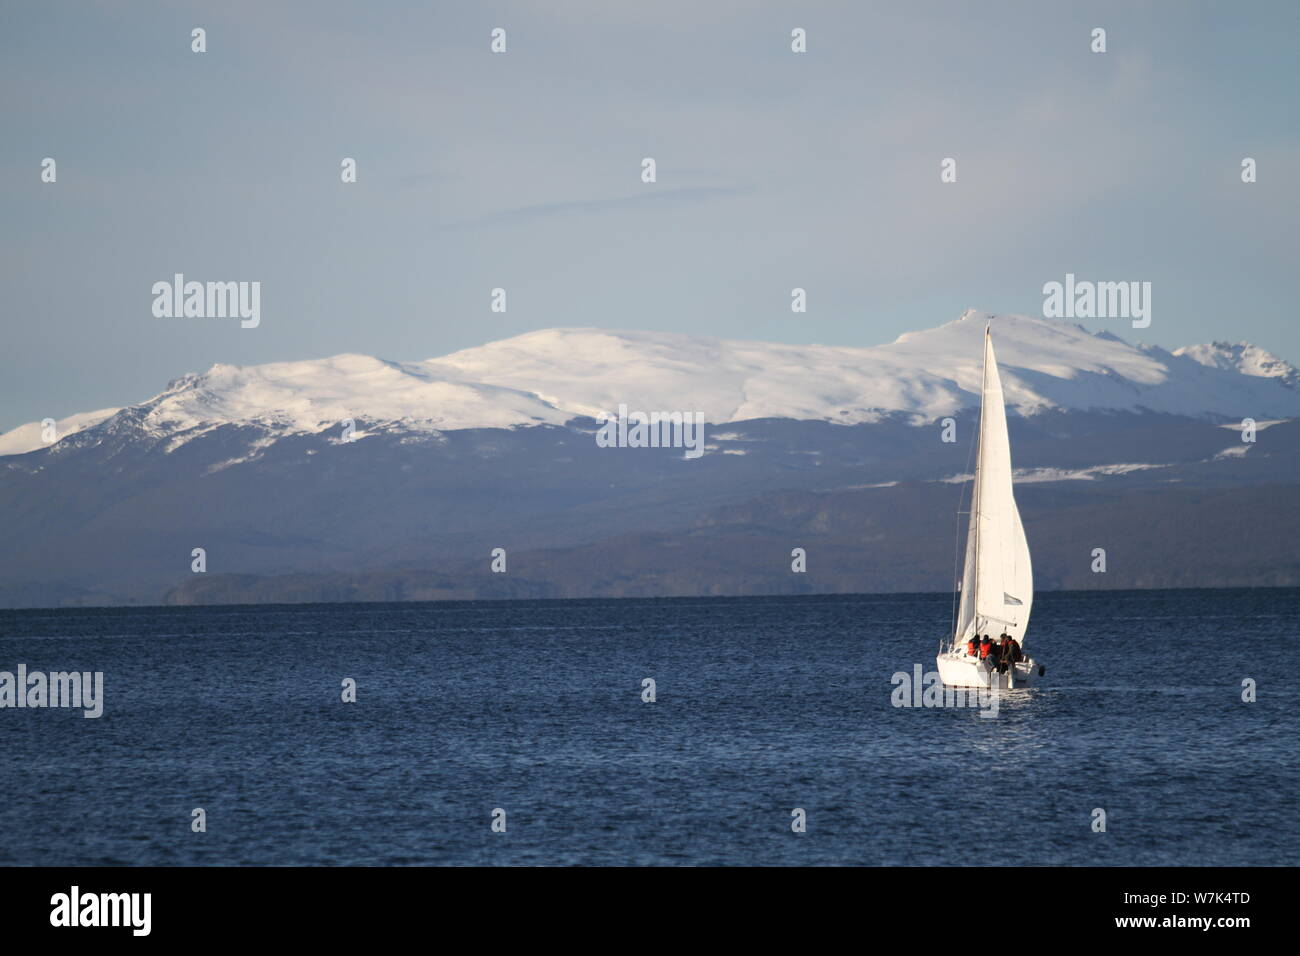 Sailboat sailing on the Beagle Channel, Ushuaia, Tierra del Fuego, Argentina. July 2019 Stock Photo